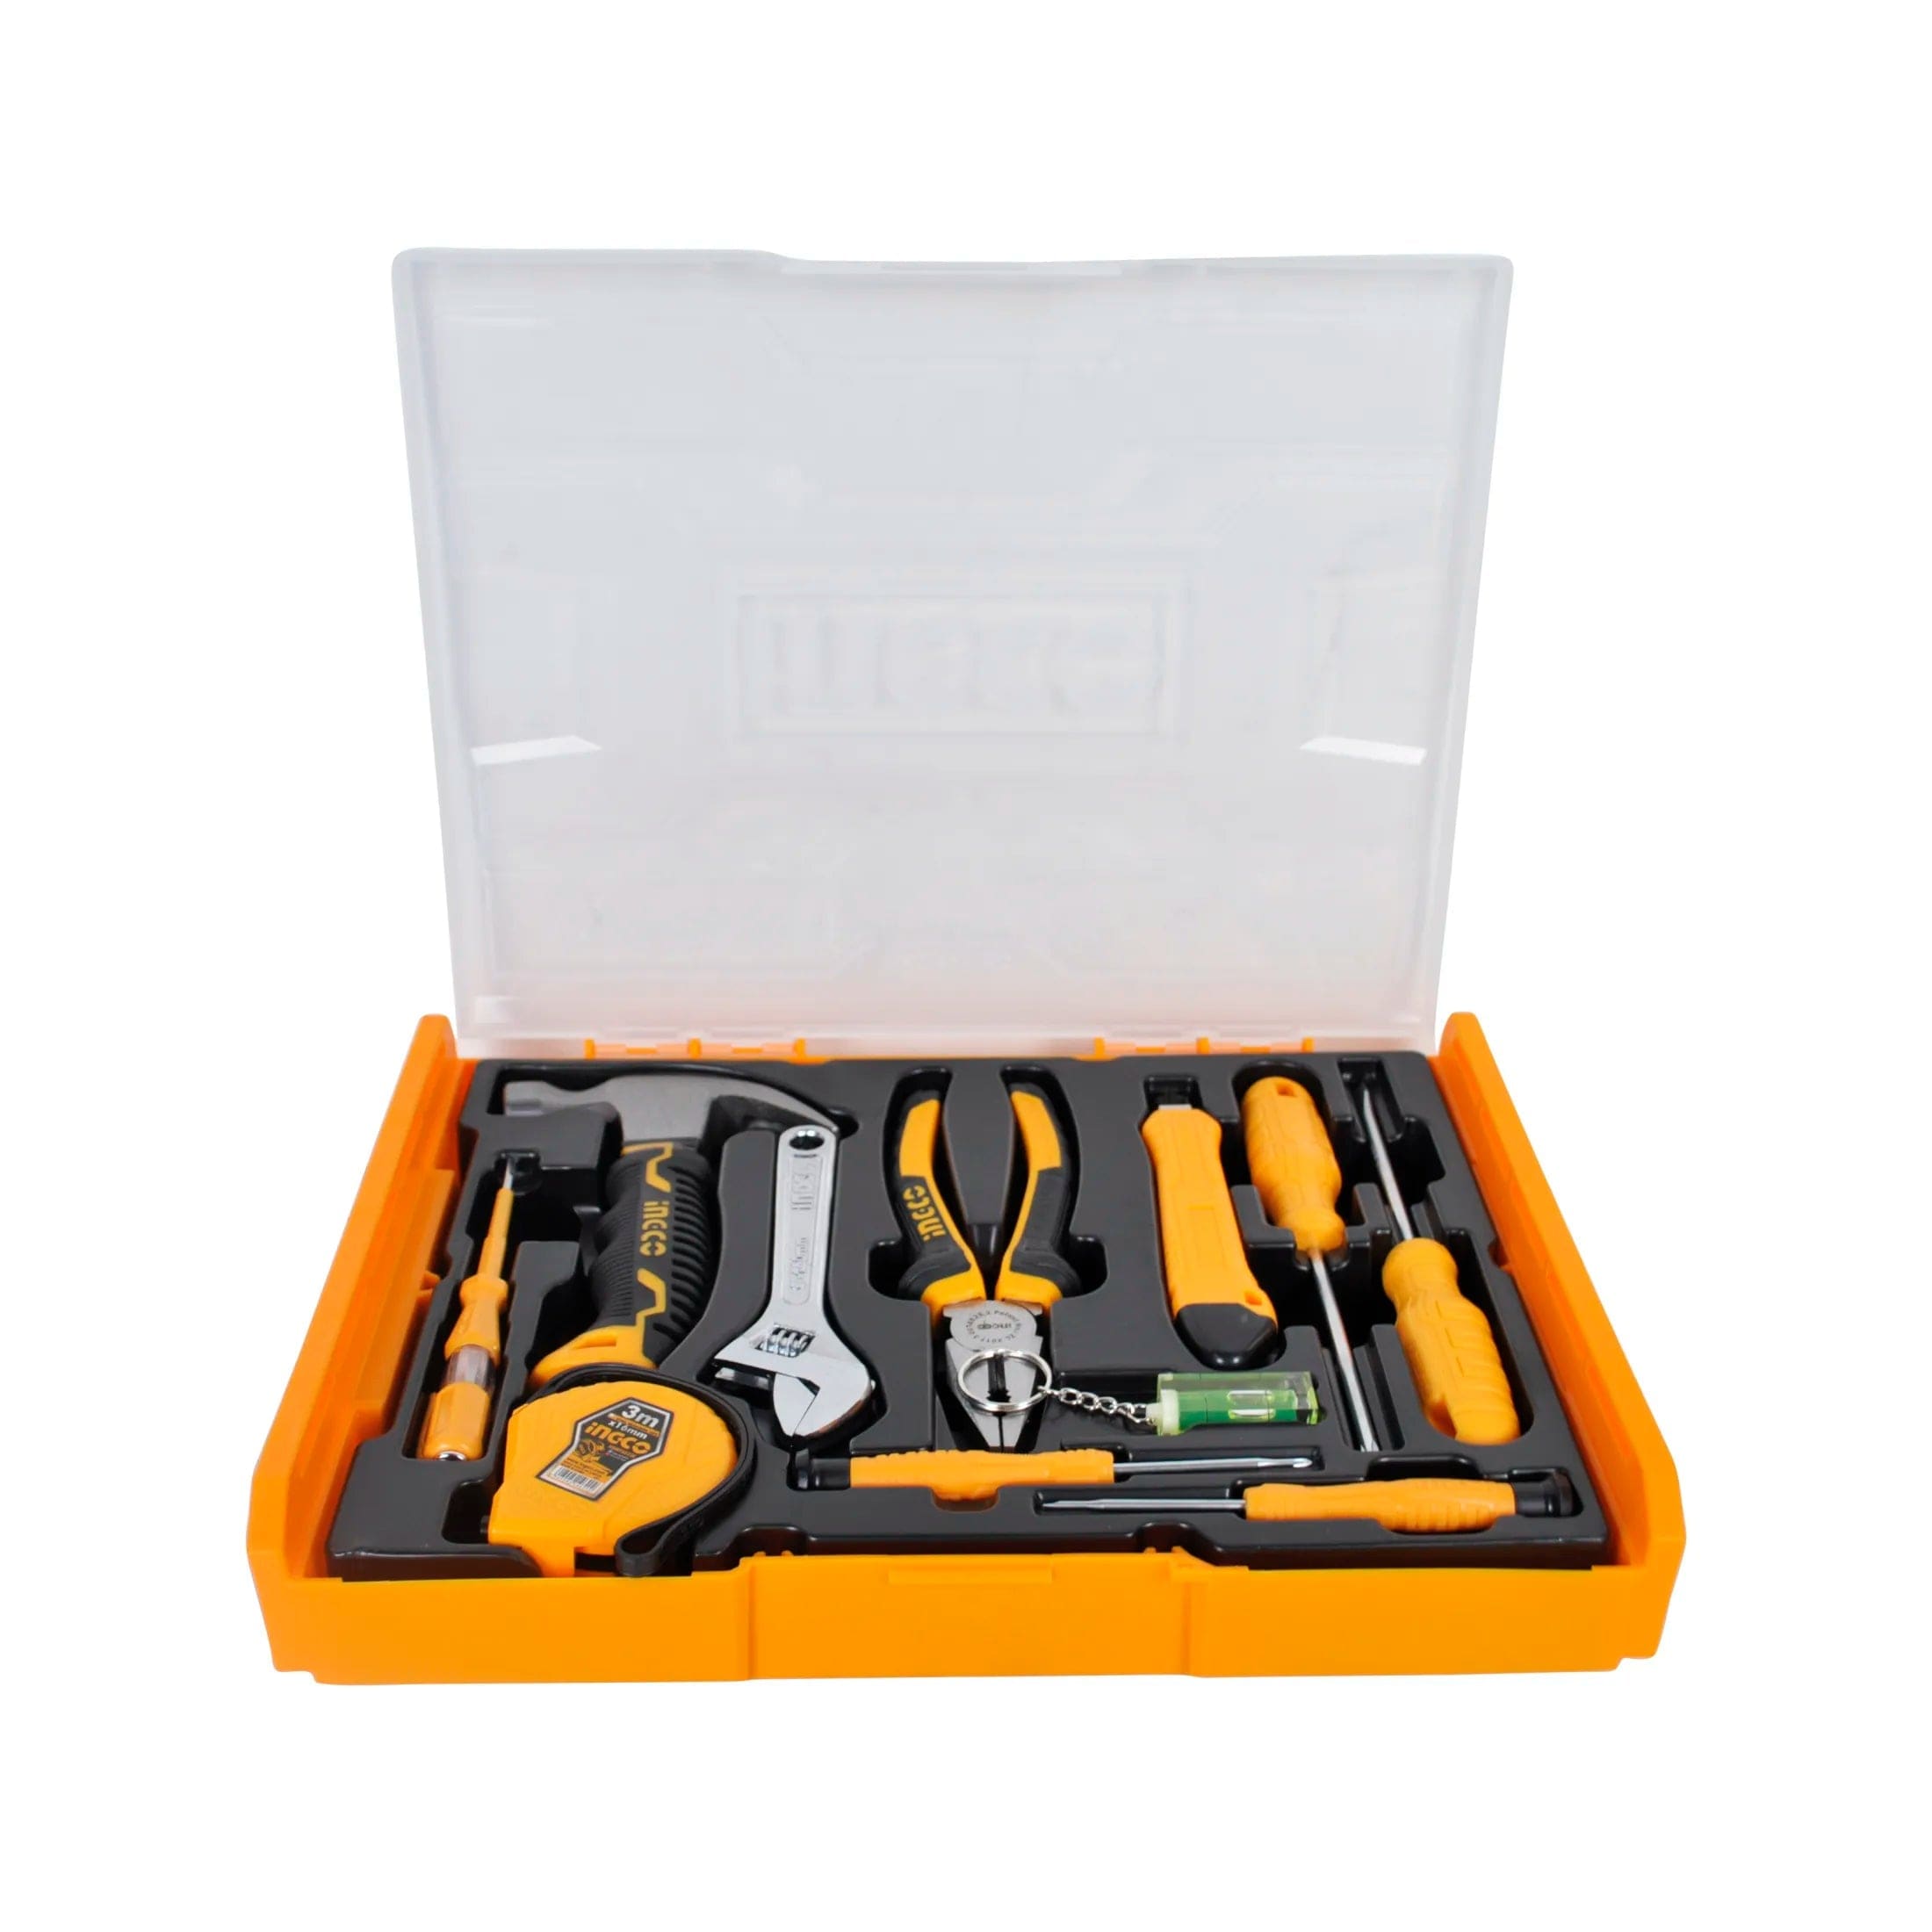 Ingco 11 Pieces Household Tool Set (HKTV01H111) - Essential Toolkit for Home Projects | Supply Master Ghana Tool Set Buy Tools hardware Building materials